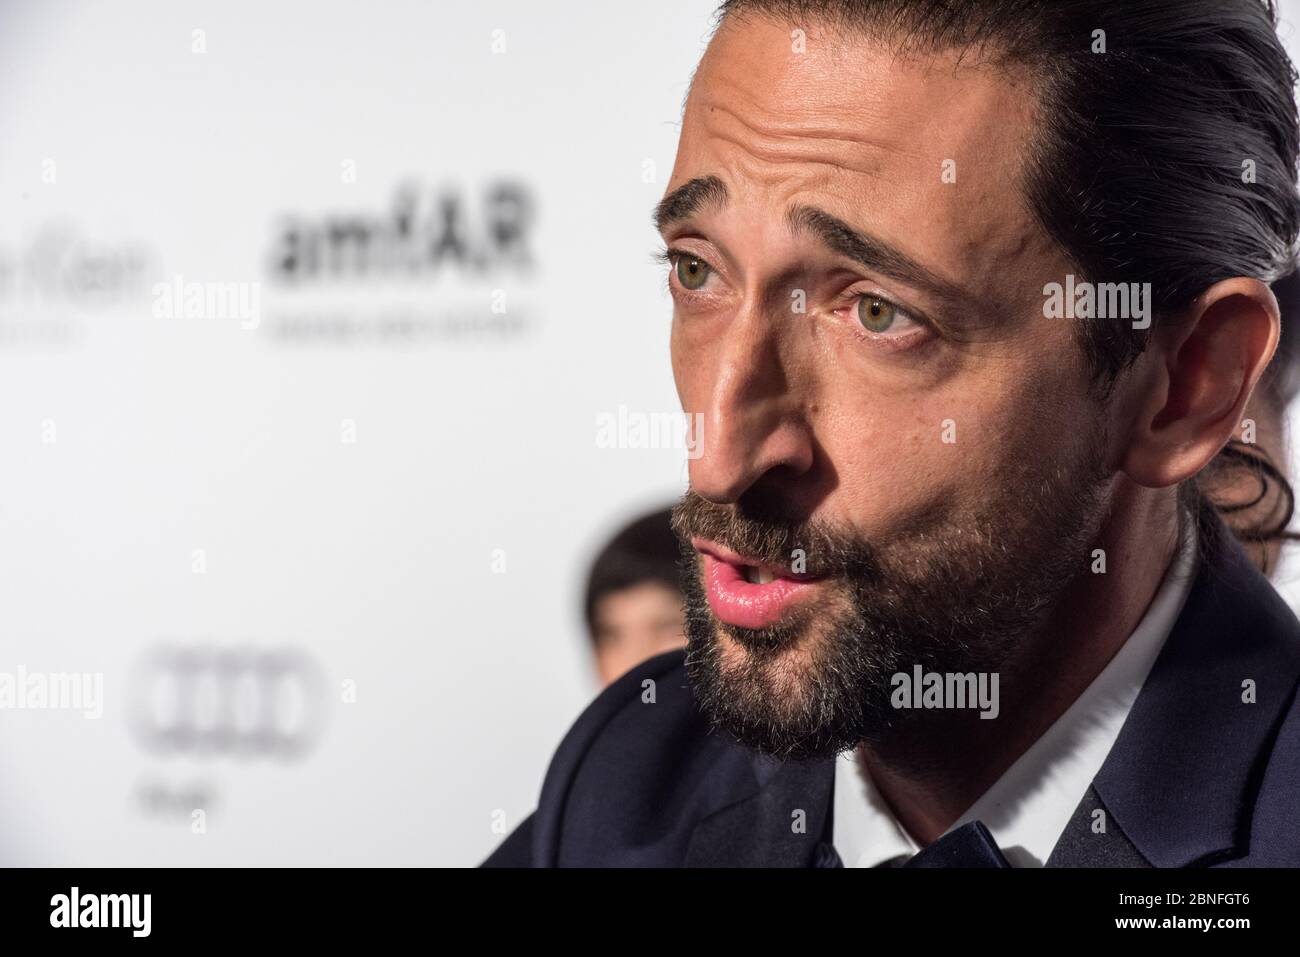 Adrien Brody.The Foundation for AIDS Research presents its second amfAR Hong Kong event. The black-tie gala gives special recognition to Victoria Beck Stock Photo